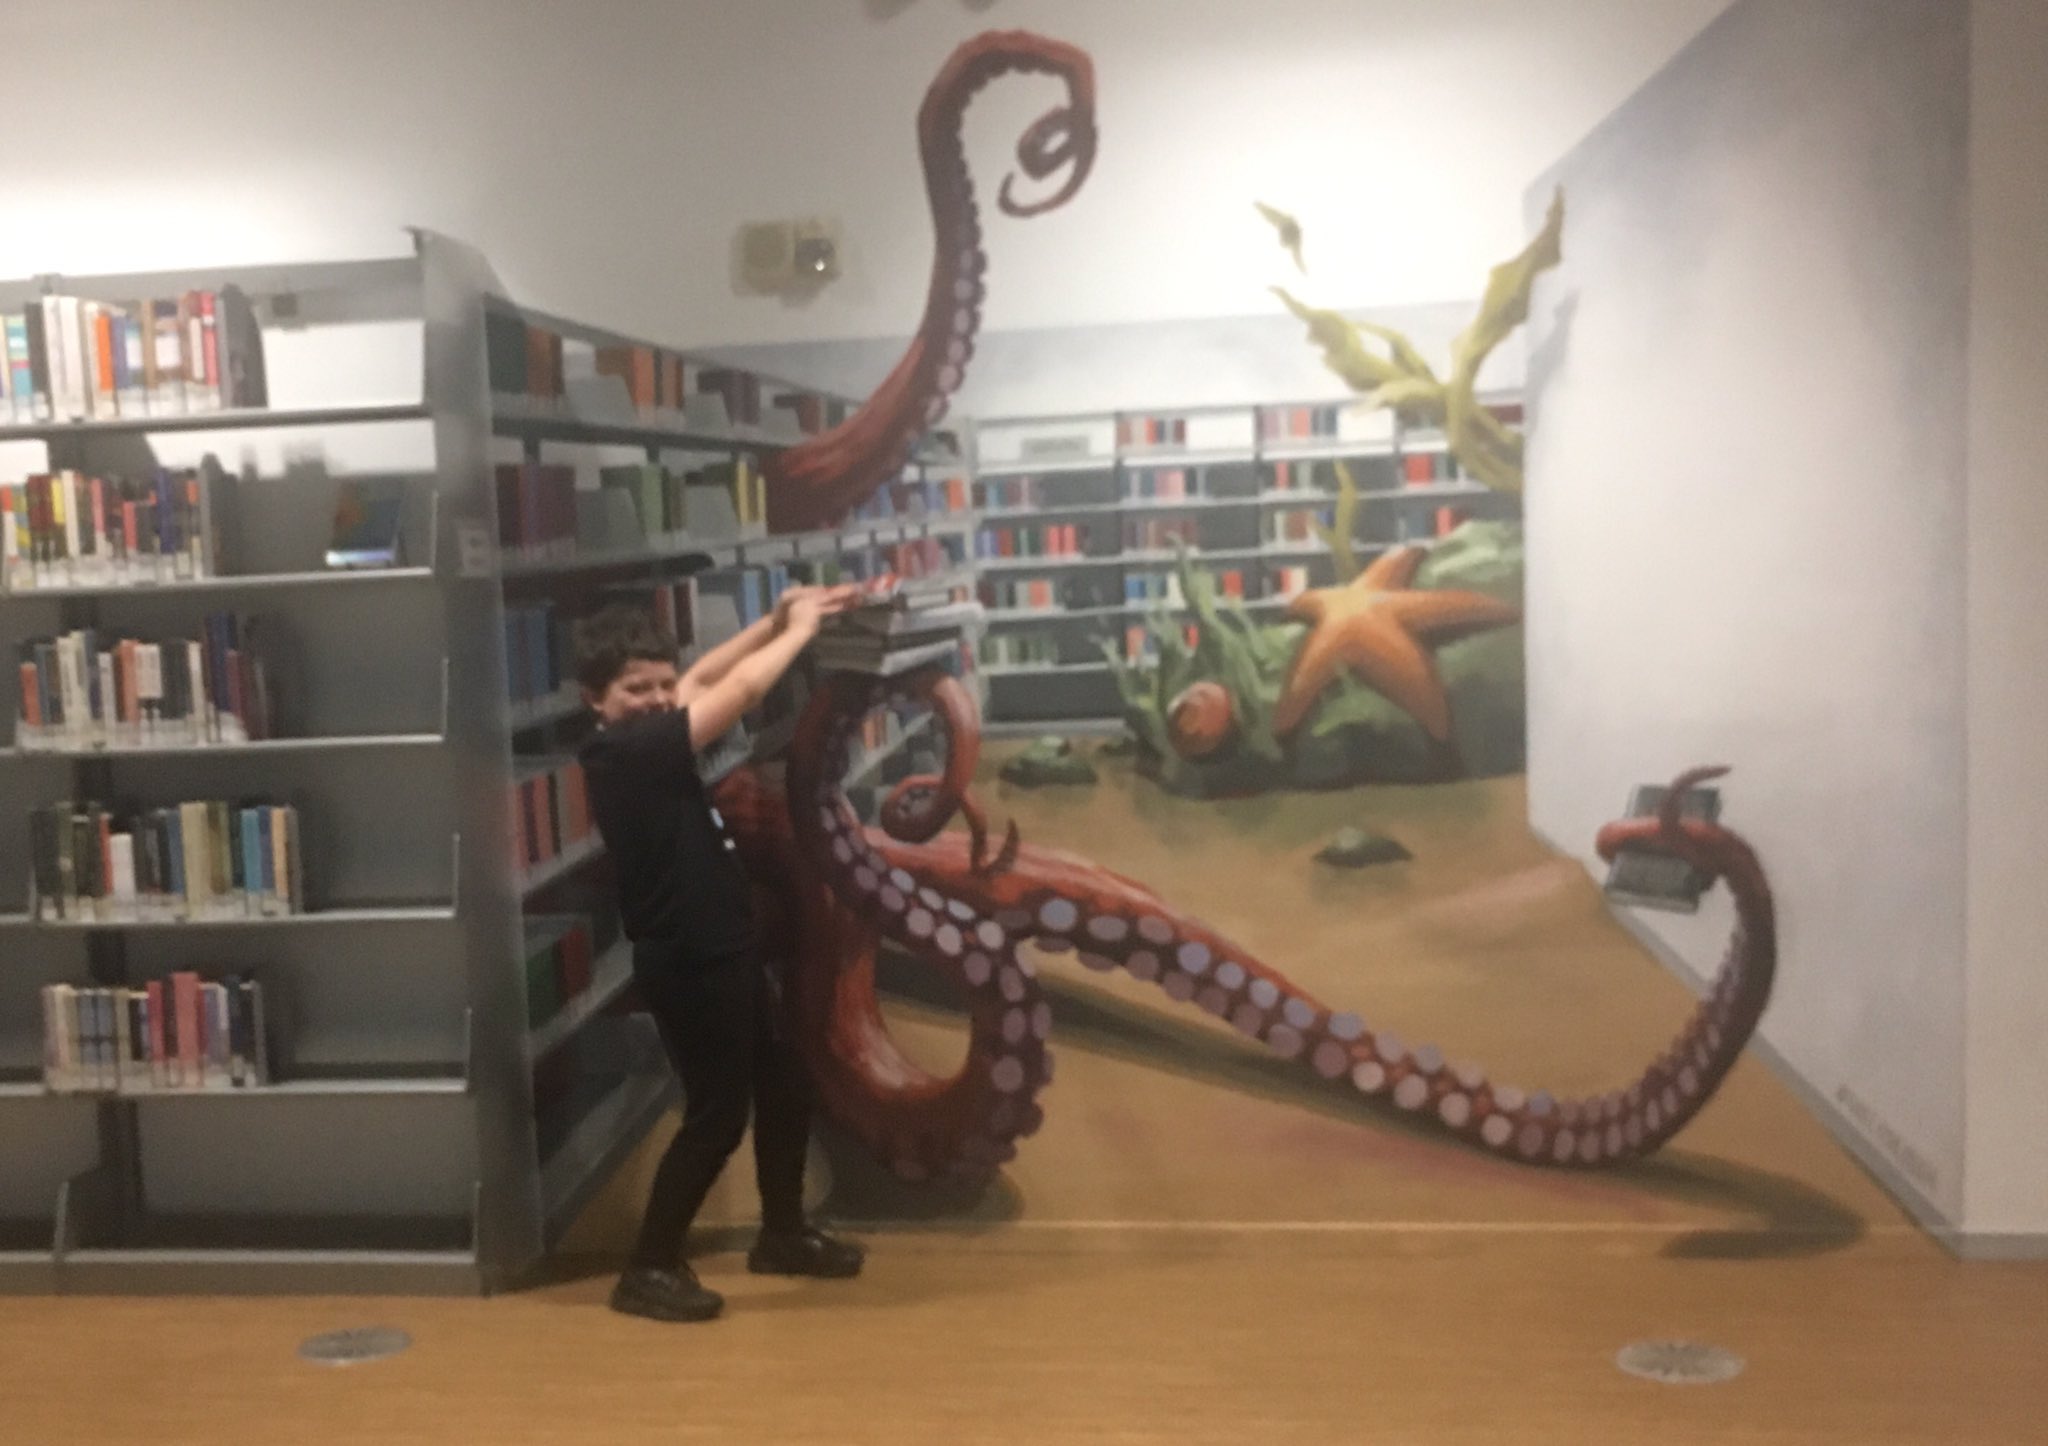 Off to the left is a library bookshelf. To the right of the bookshelf is a mural painted to look like additional library books stacks and it looks like very large octopus arms are reaching through the open shelving. Calvin is pretending to try pulling a book away from the octopus.